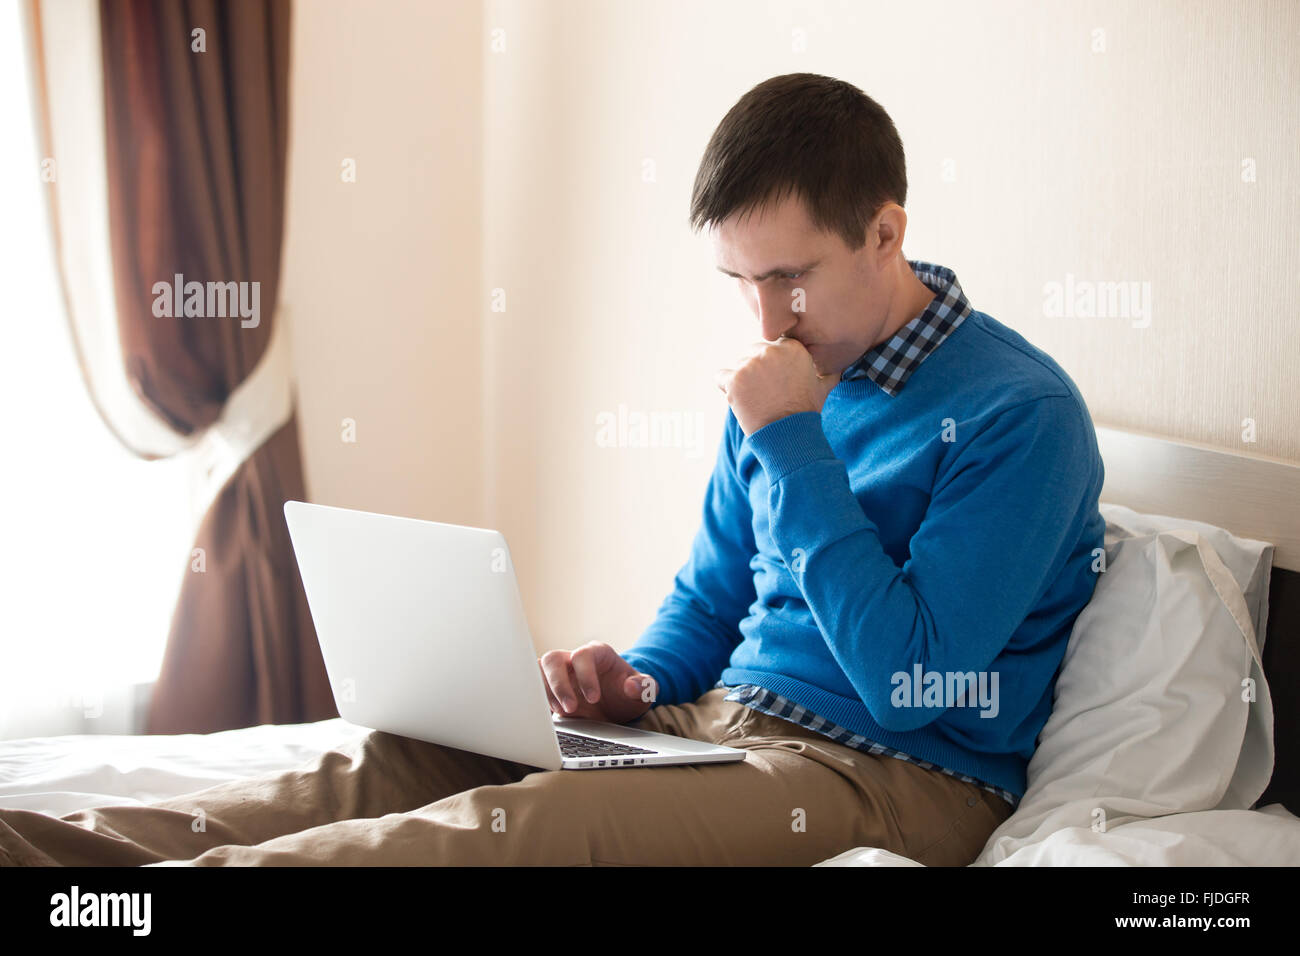 Portrait of young focused man sitting on bed with laptop wearing smart casual clothing, concentrated on work, male model Stock Photo